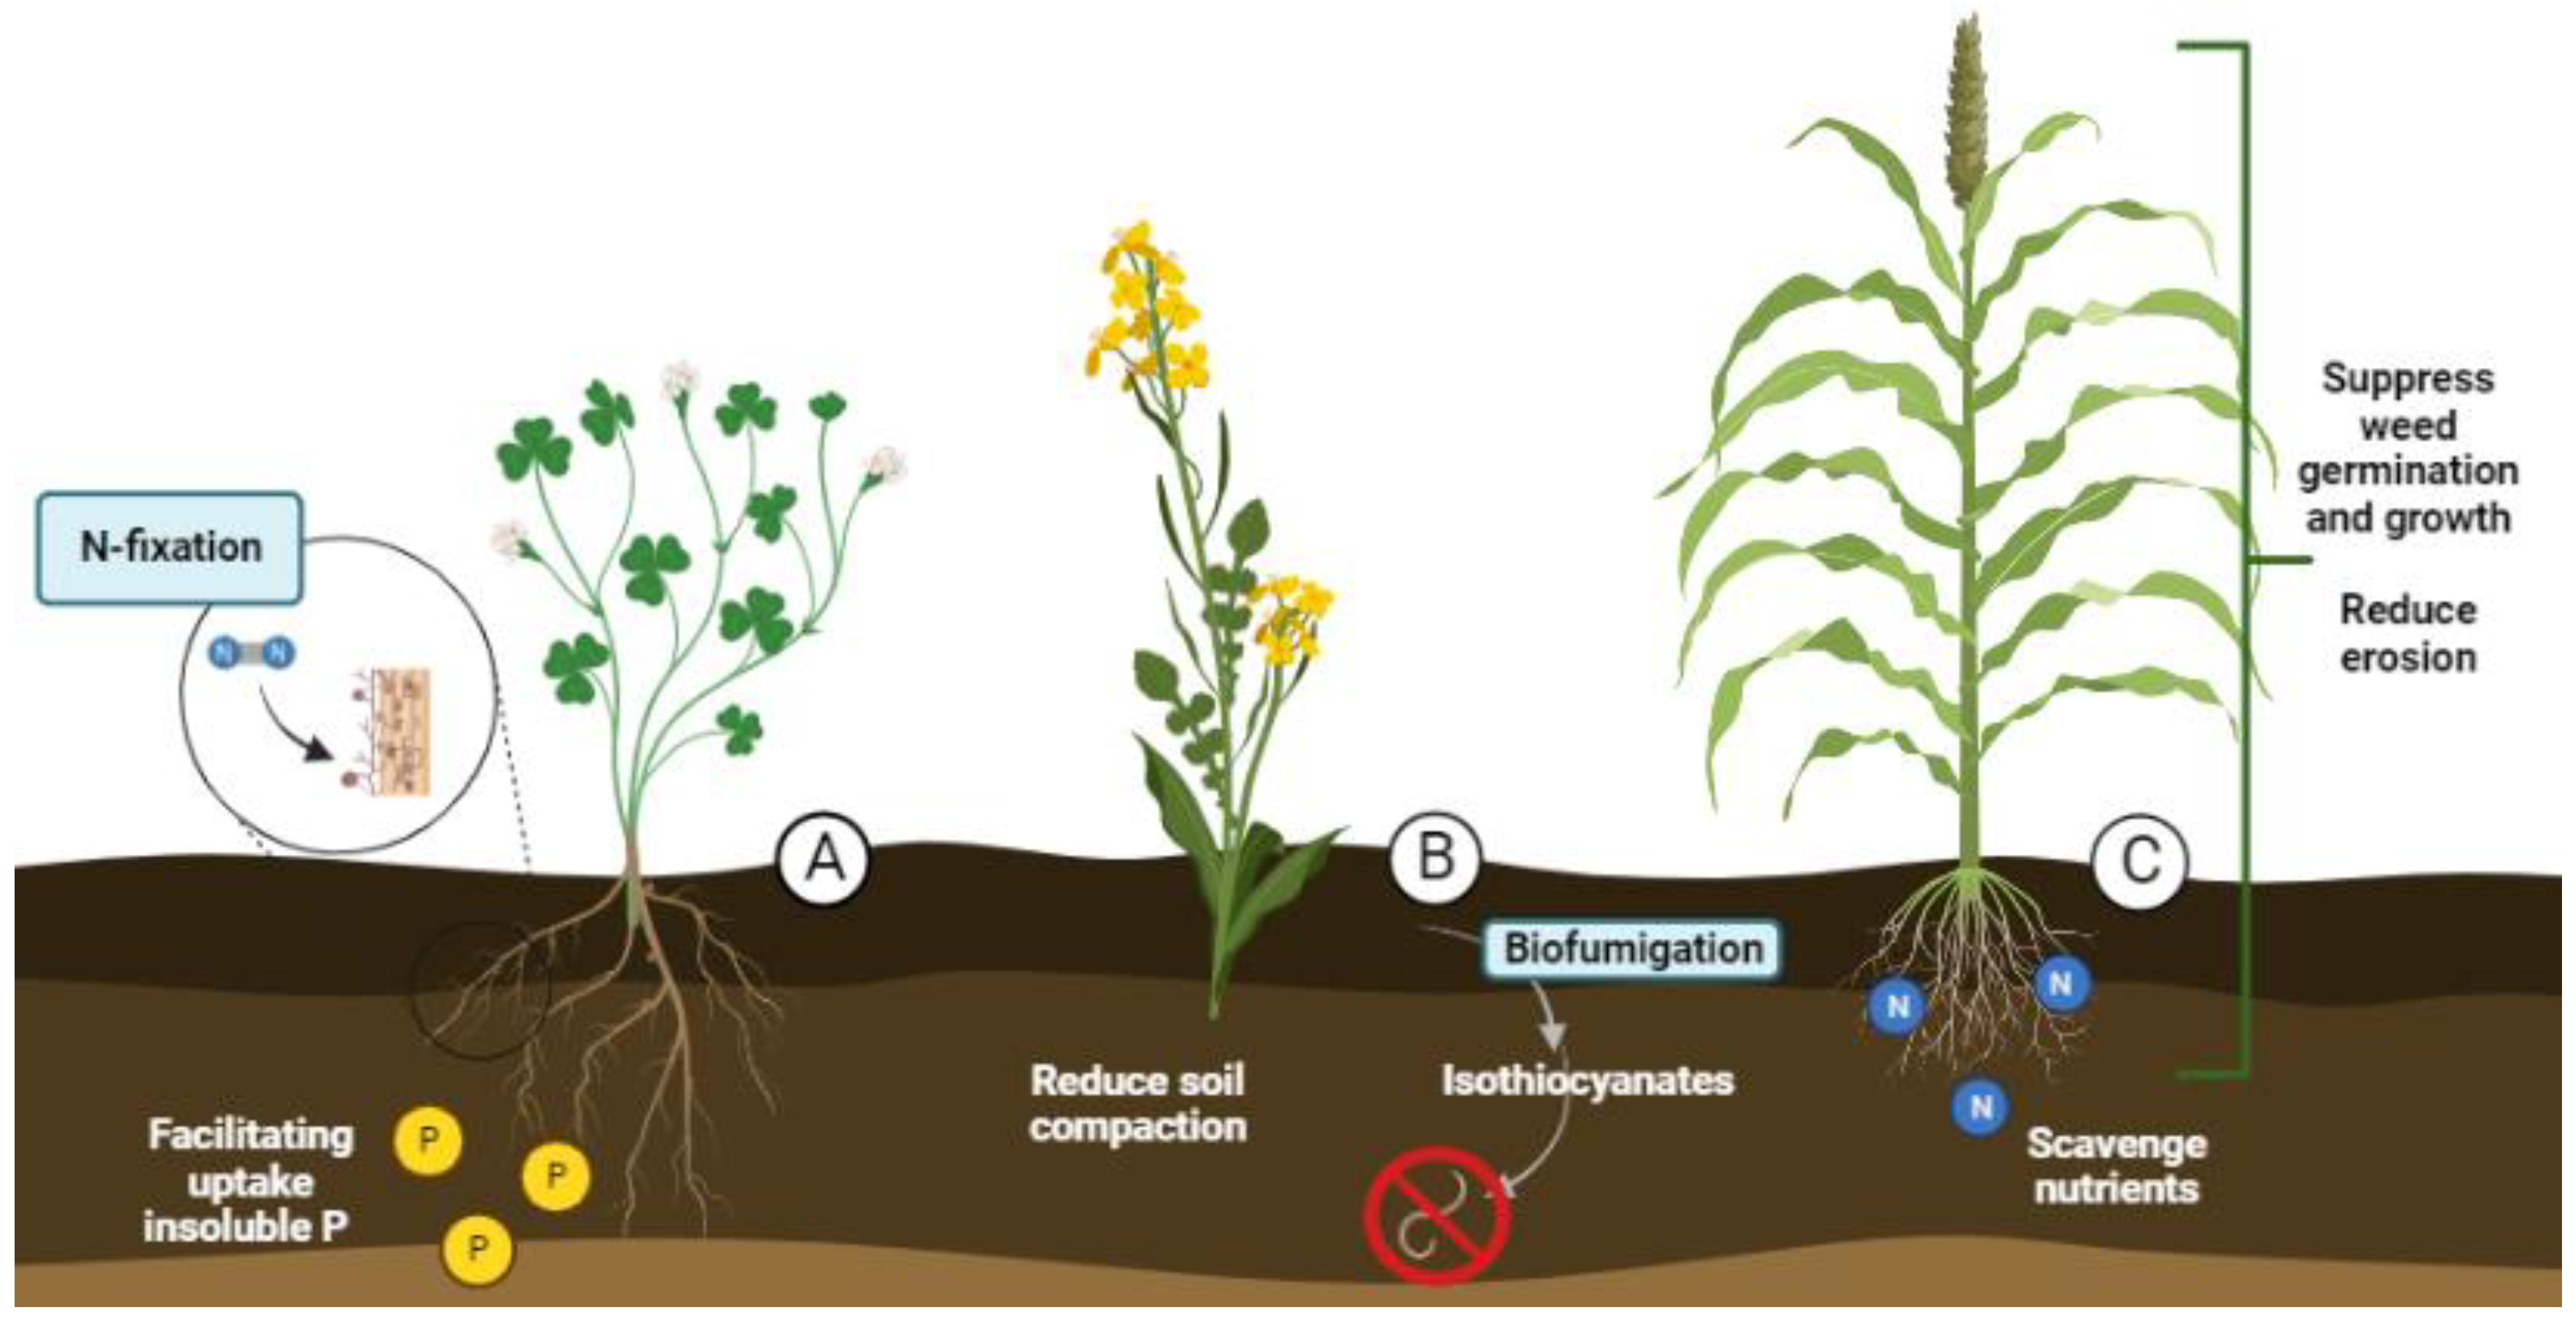 Crop cover is more important than rotational diversity for soil